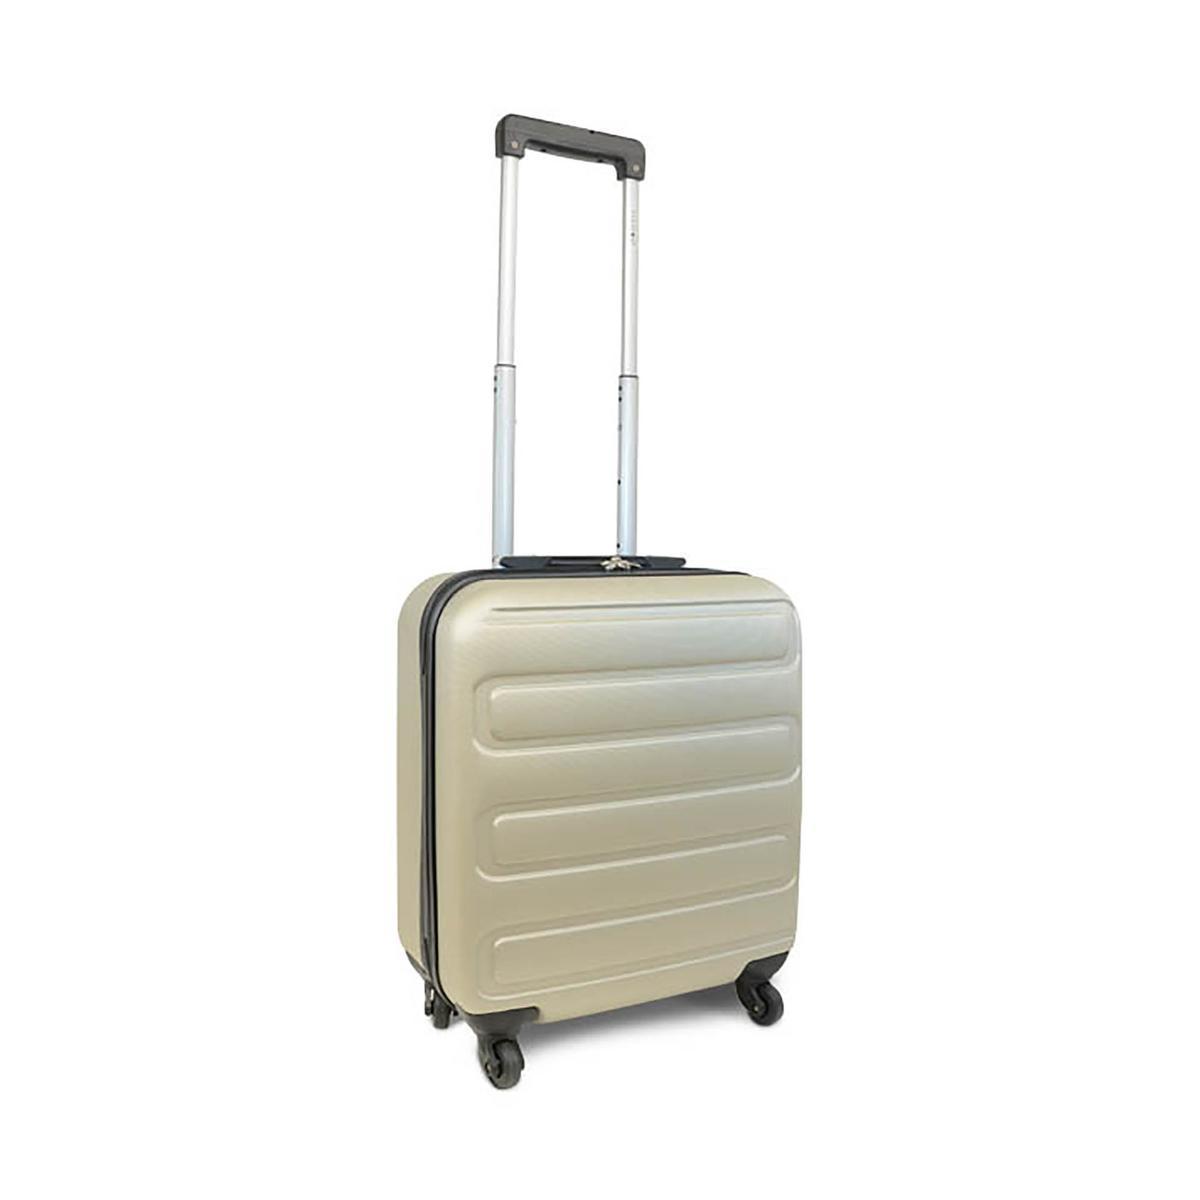 Valise ABS champagne - 45 x 45 x 20 cm